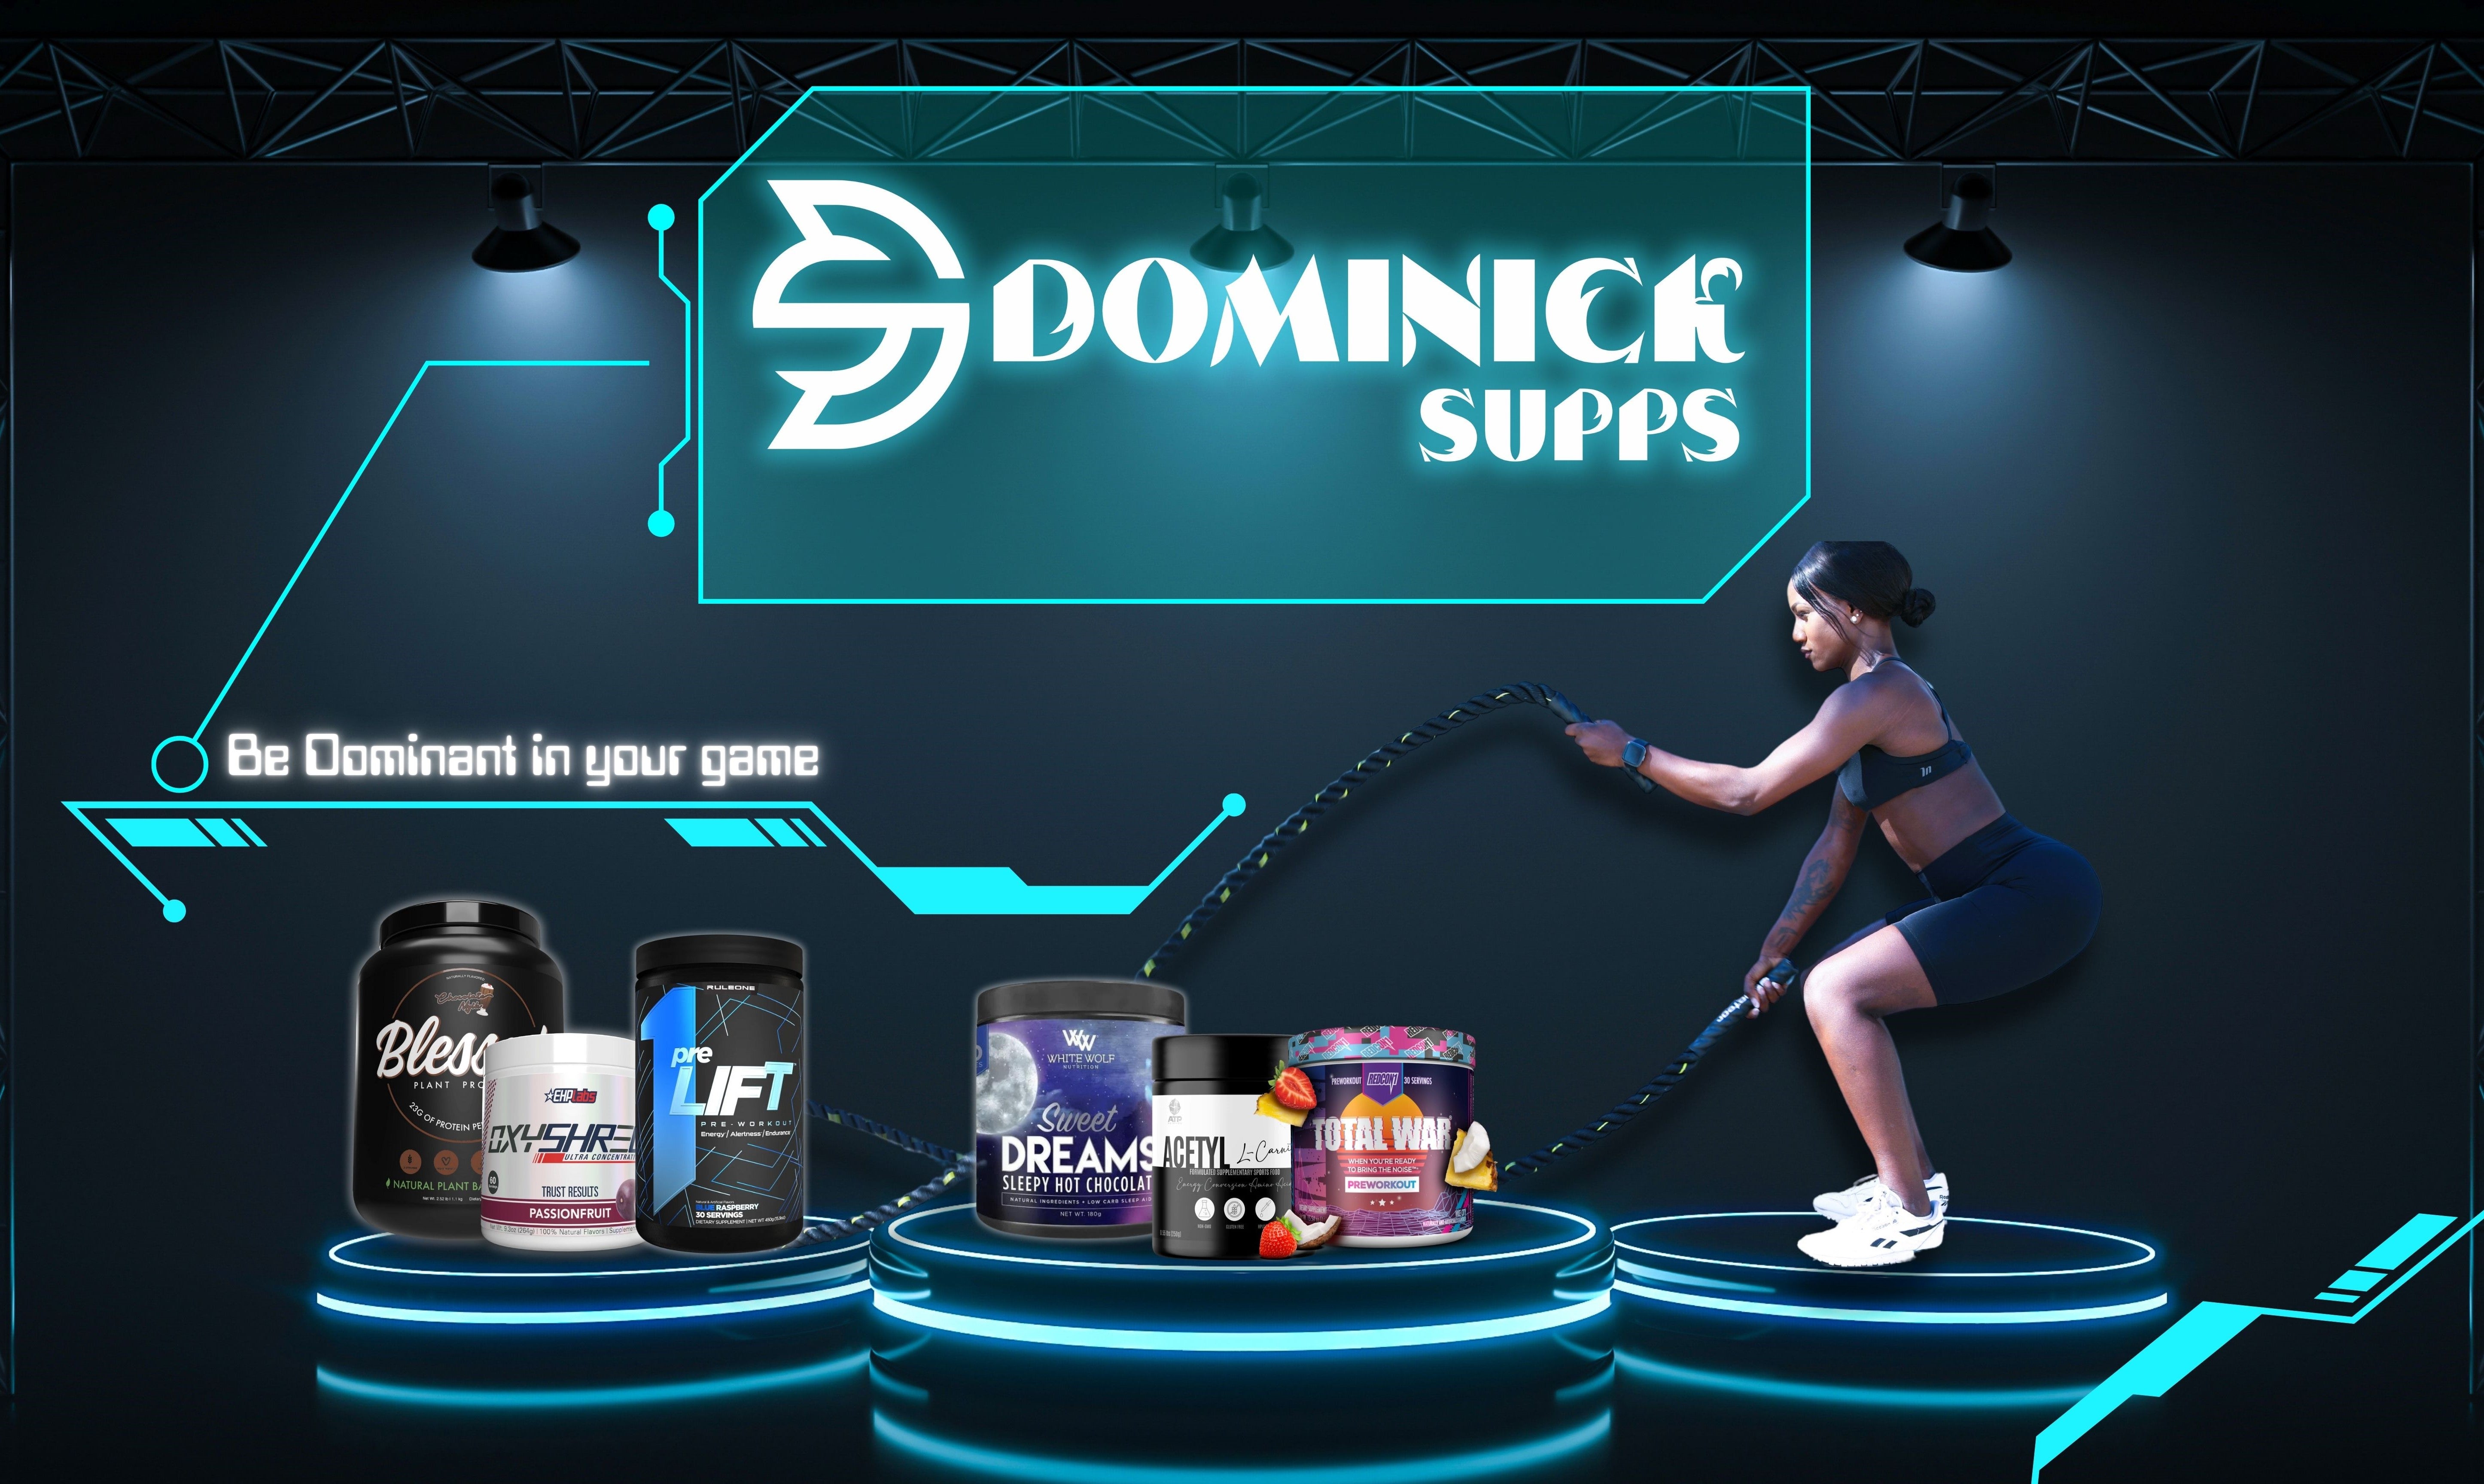 Dominick Supps